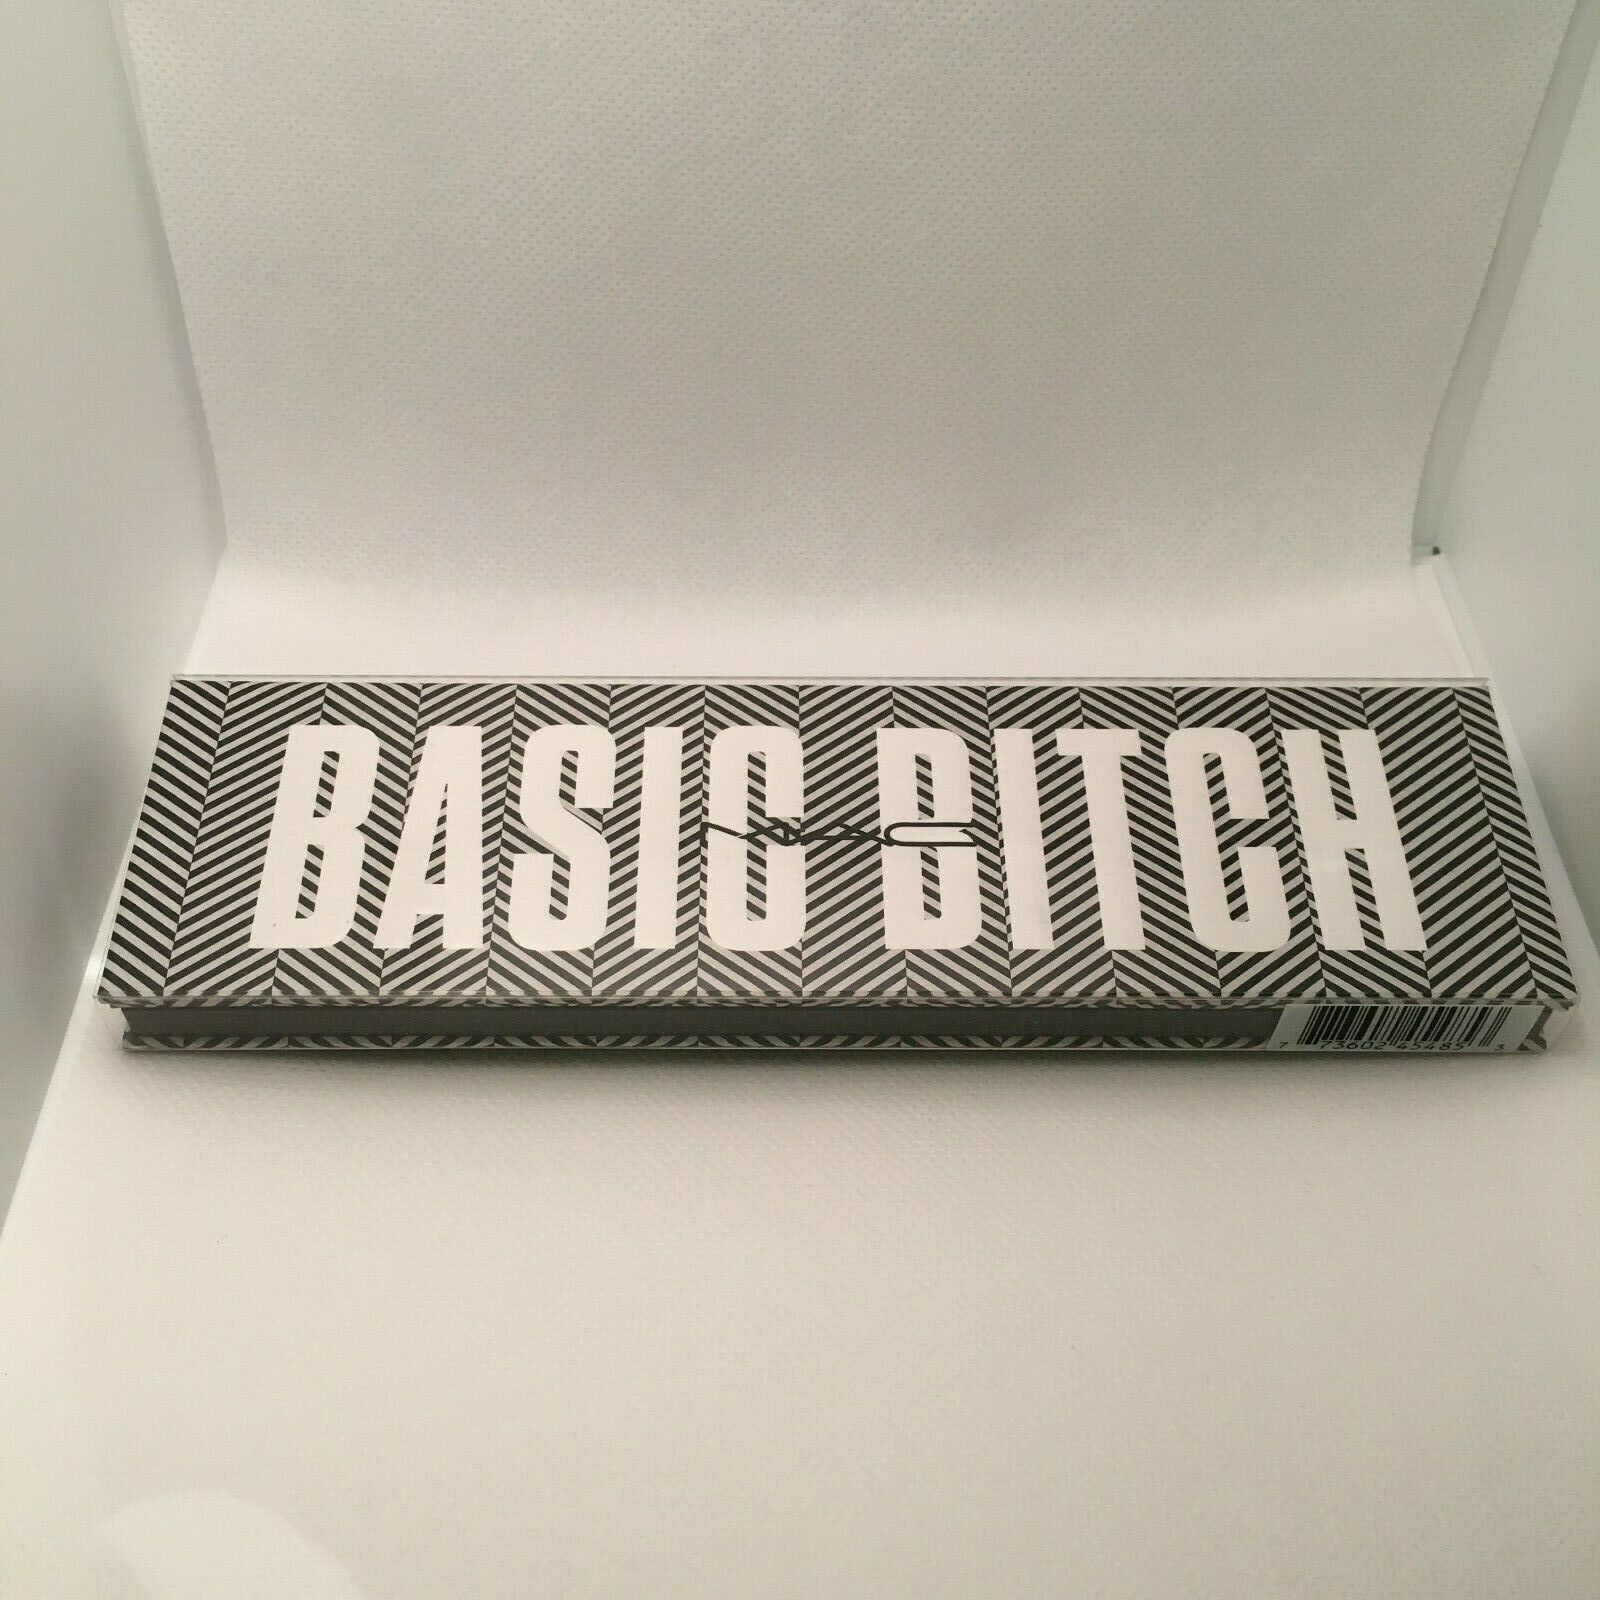 Primary image for MAC Girls Basic Bitch Palette